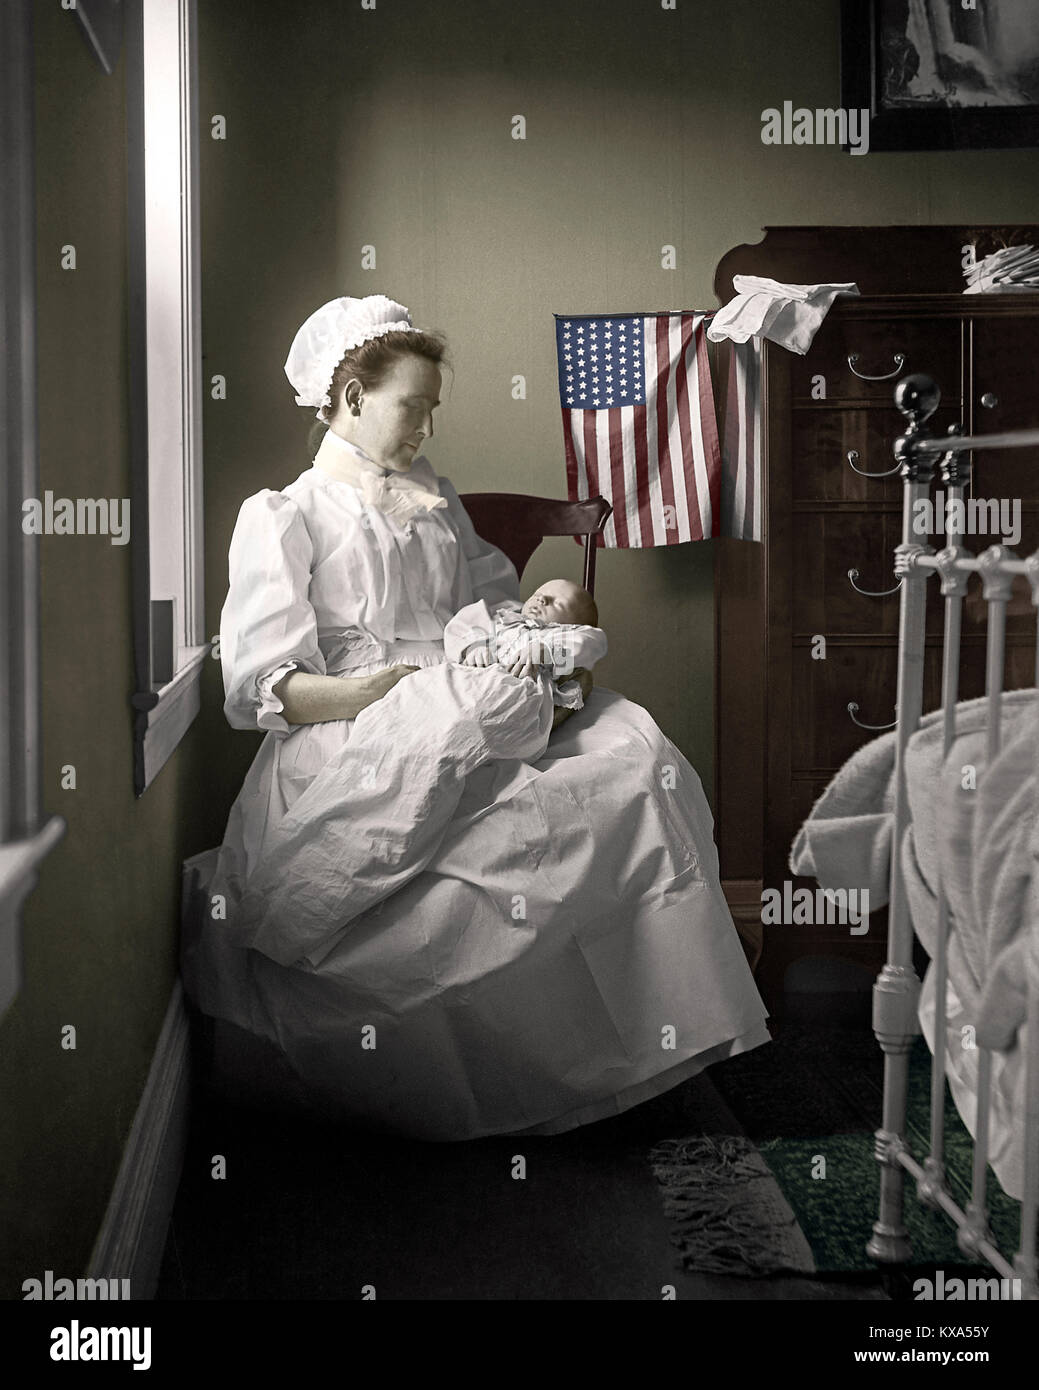 Mother with newborn baby in bedroom. The US Flag with 46 stars was in use from  July  4, 1908 to  July 3, 1912. Image from 4x5 inch B&W nitrate camera negative. Stock Photo